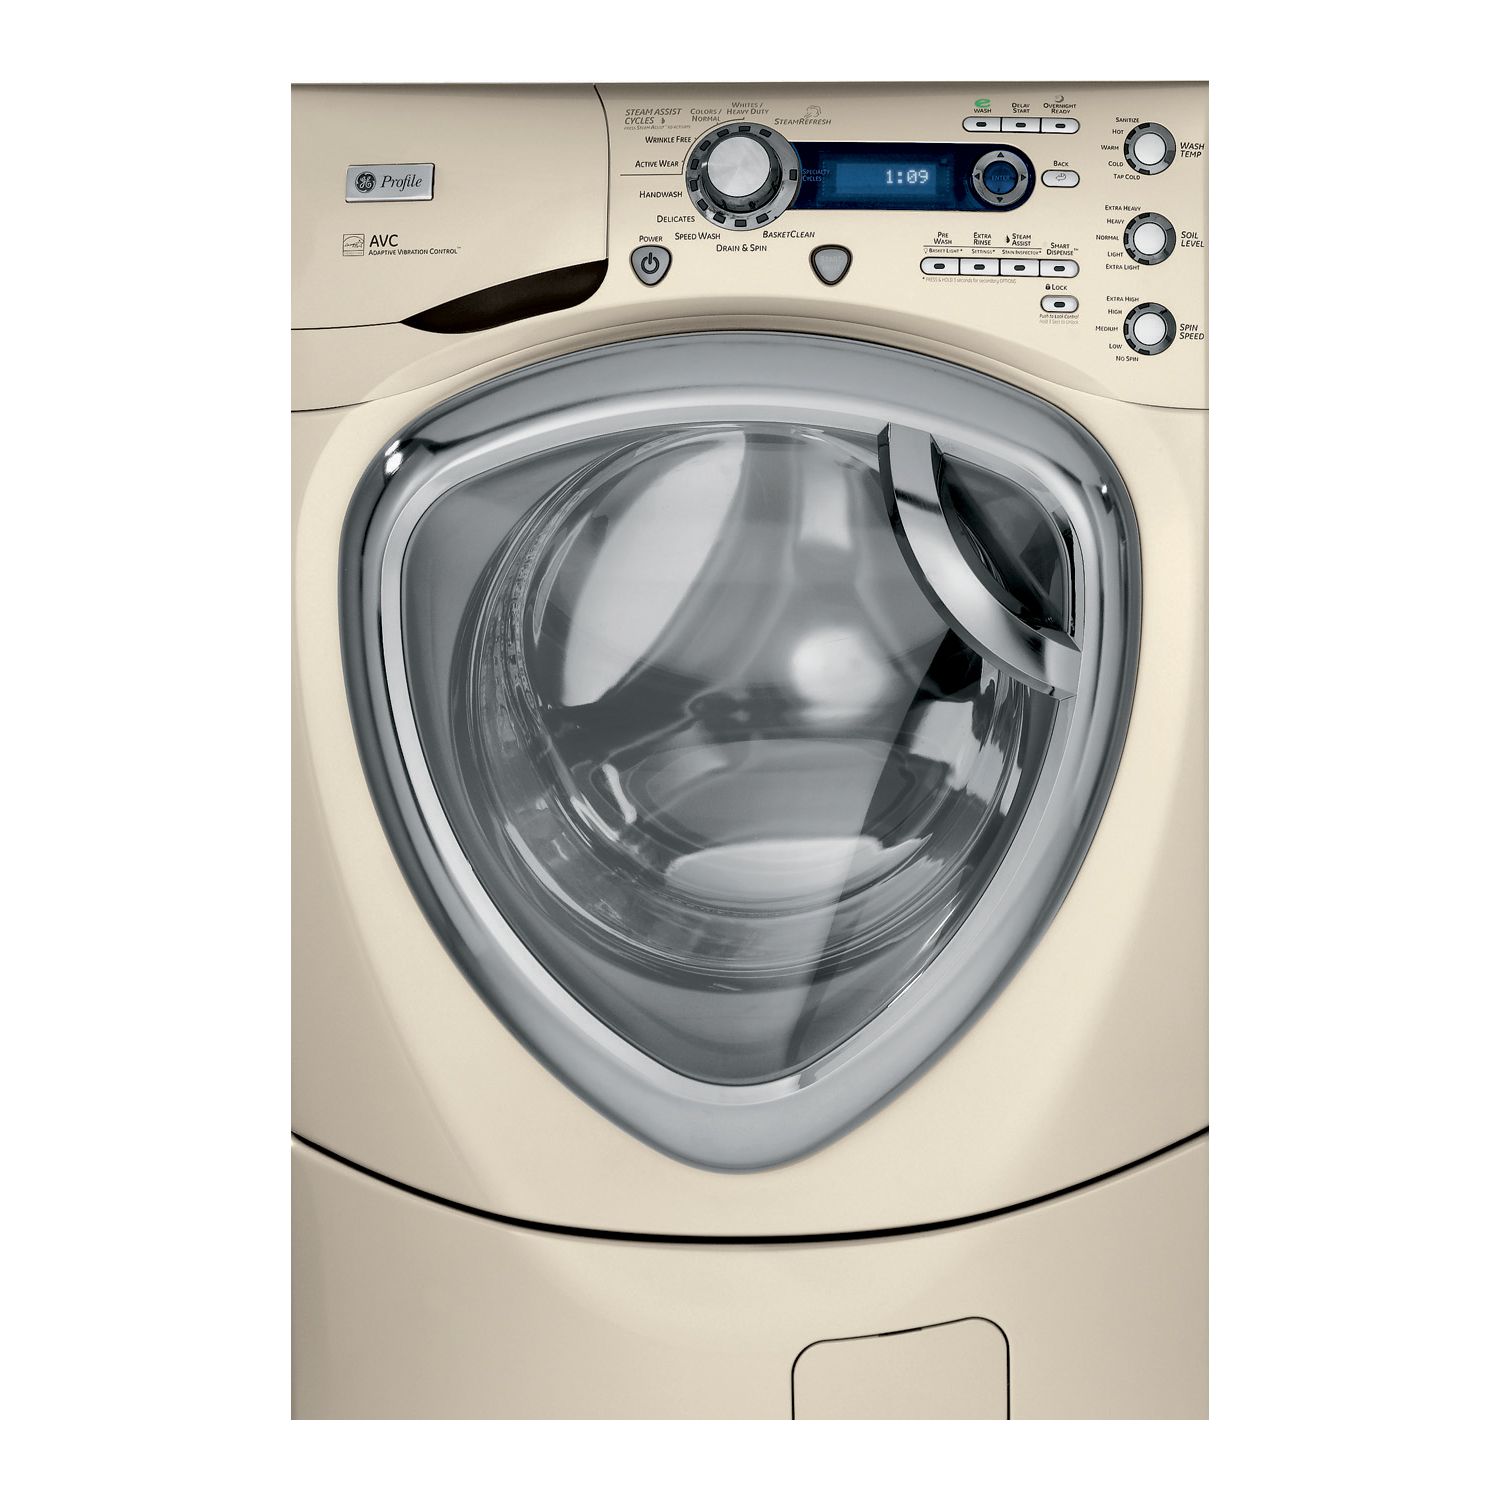 GE Profile Series 4.3 cu. ft. Front-Load Washer w/ Steam - Champagne